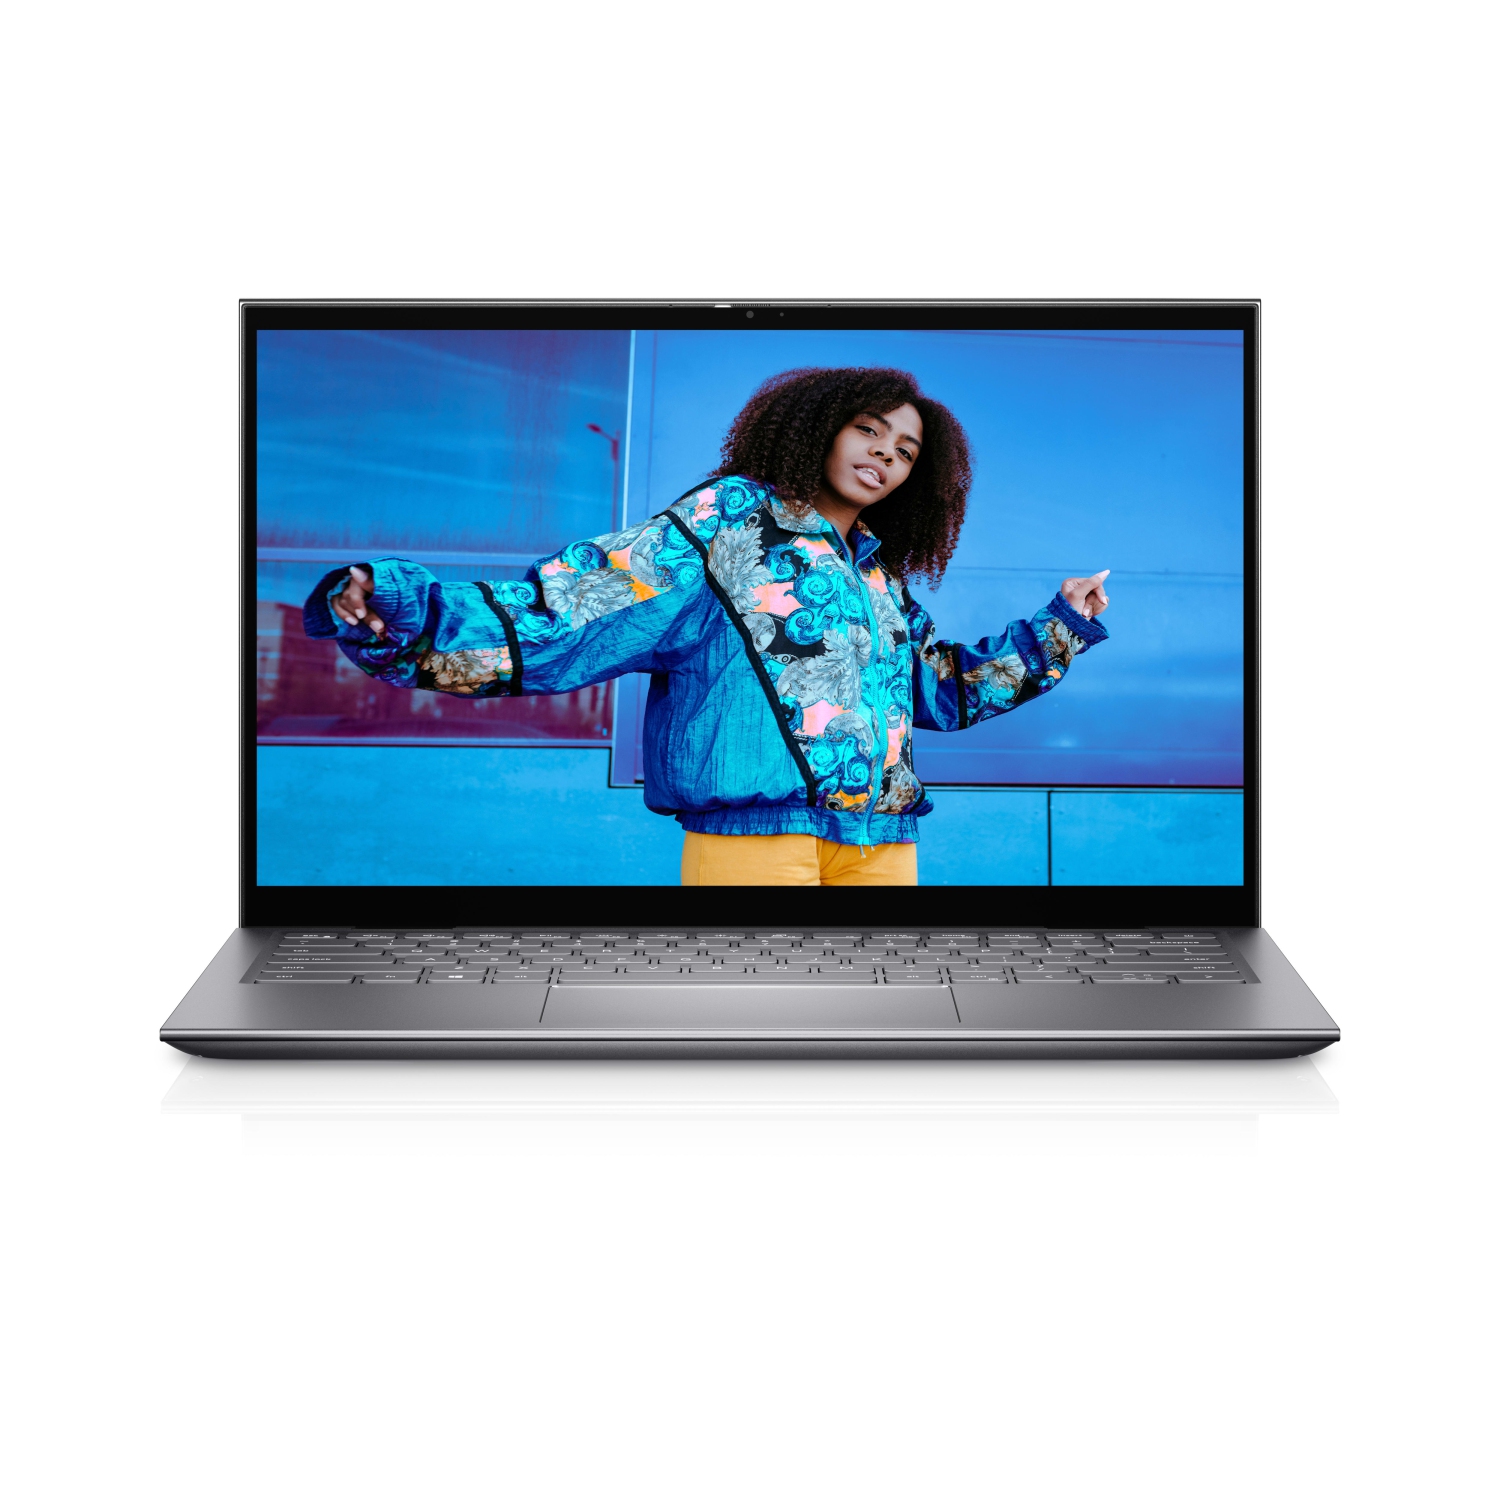 Refurbished (Excellent) – Dell Inspiron 5410 2-in-1 (2021) | 14" FHD Touch | Core i5 - 8TB SSD - 32GB RAM | 4 Cores @ 4.5 GHz - 11th Gen CPU